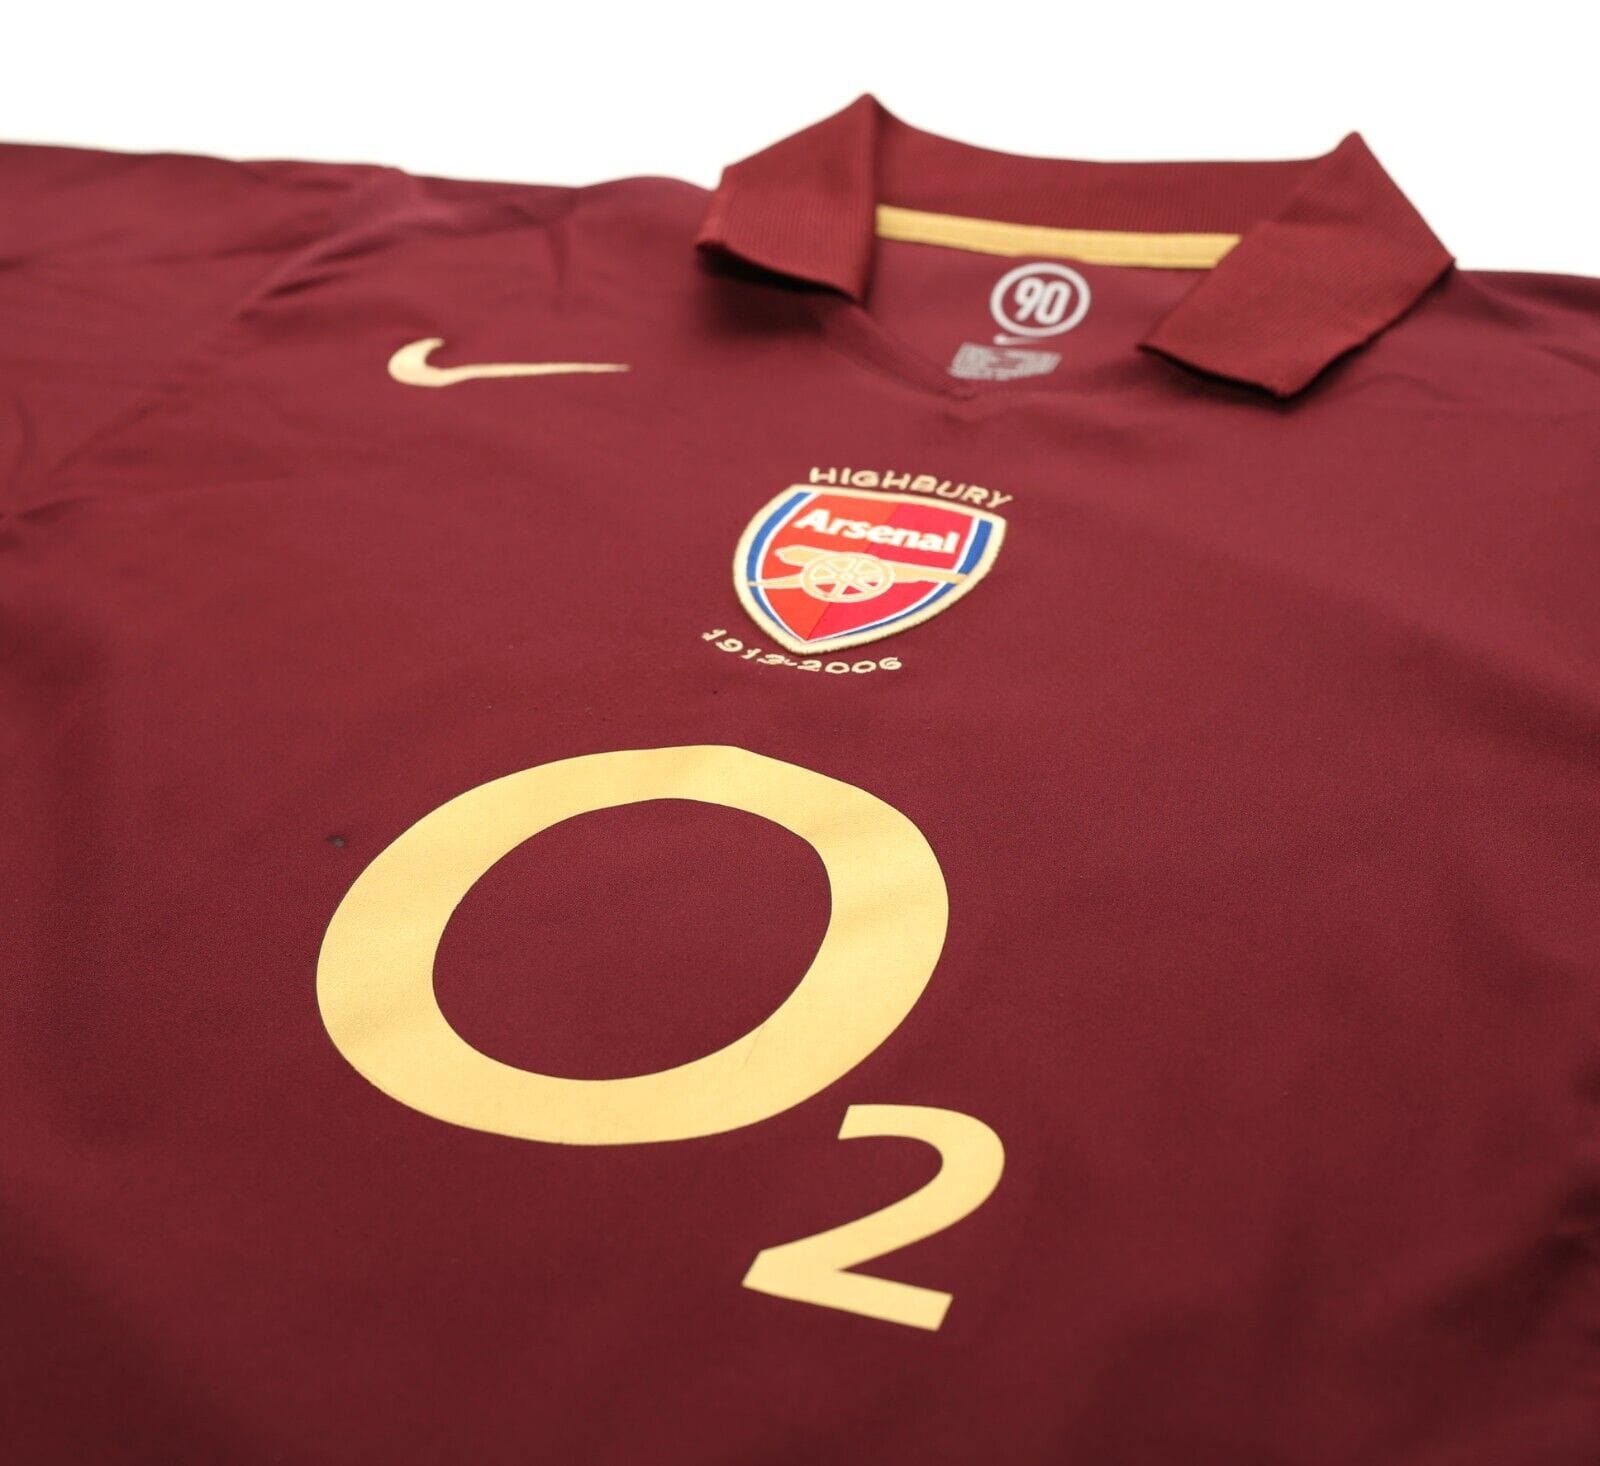 2005/06 HENRY #14 Arsenal Vintage Nike UCL Home Football Shirt Jersey (L)